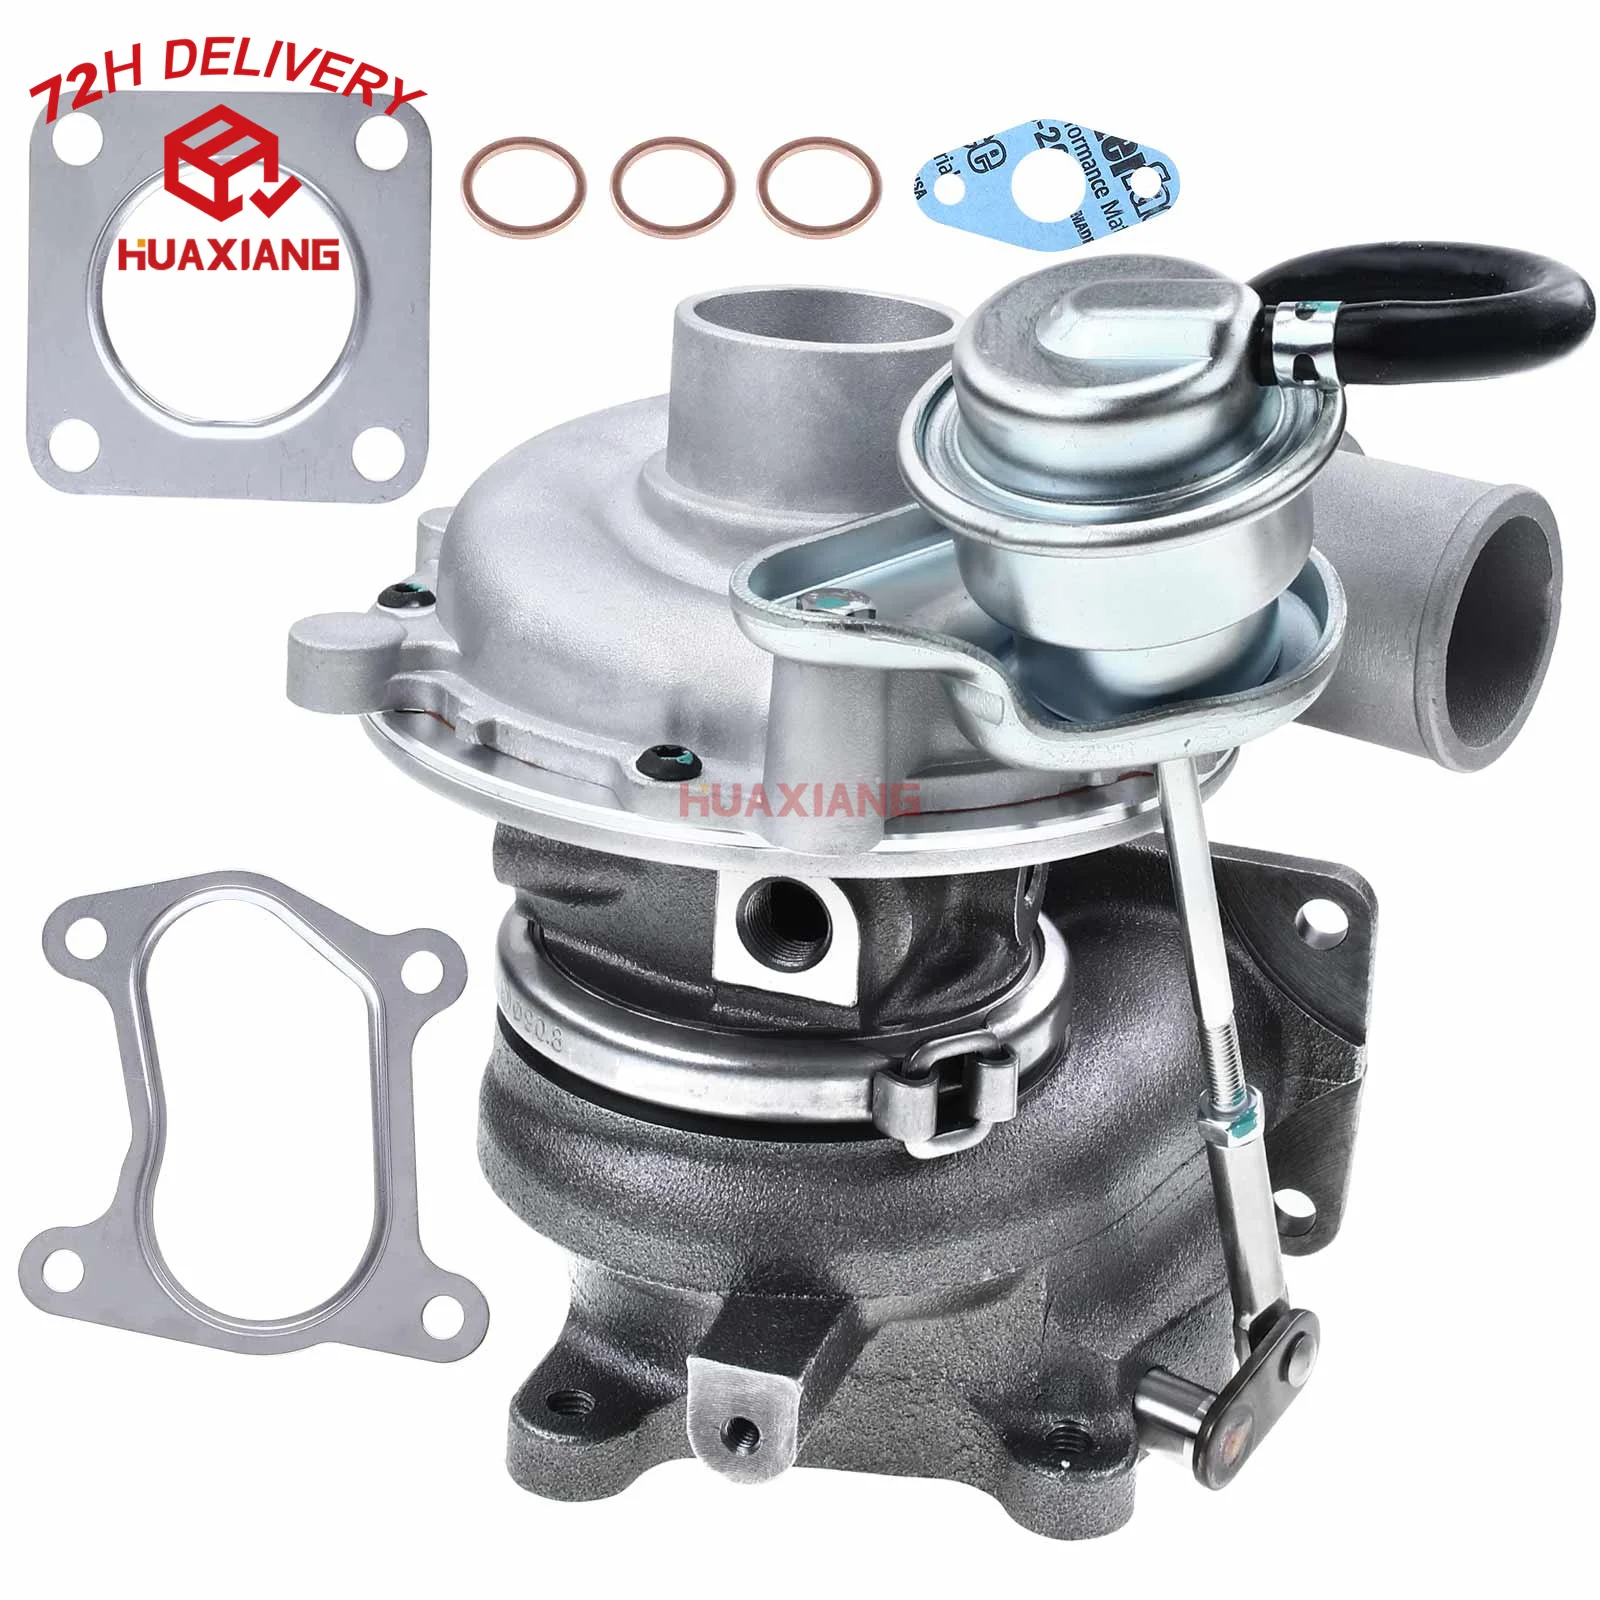 

U.S. 72H Delivery Turbo Turbocharger for Ford Ranger 1999-2006 Courier Mazda B2500 Bravo 2.5L RHF5